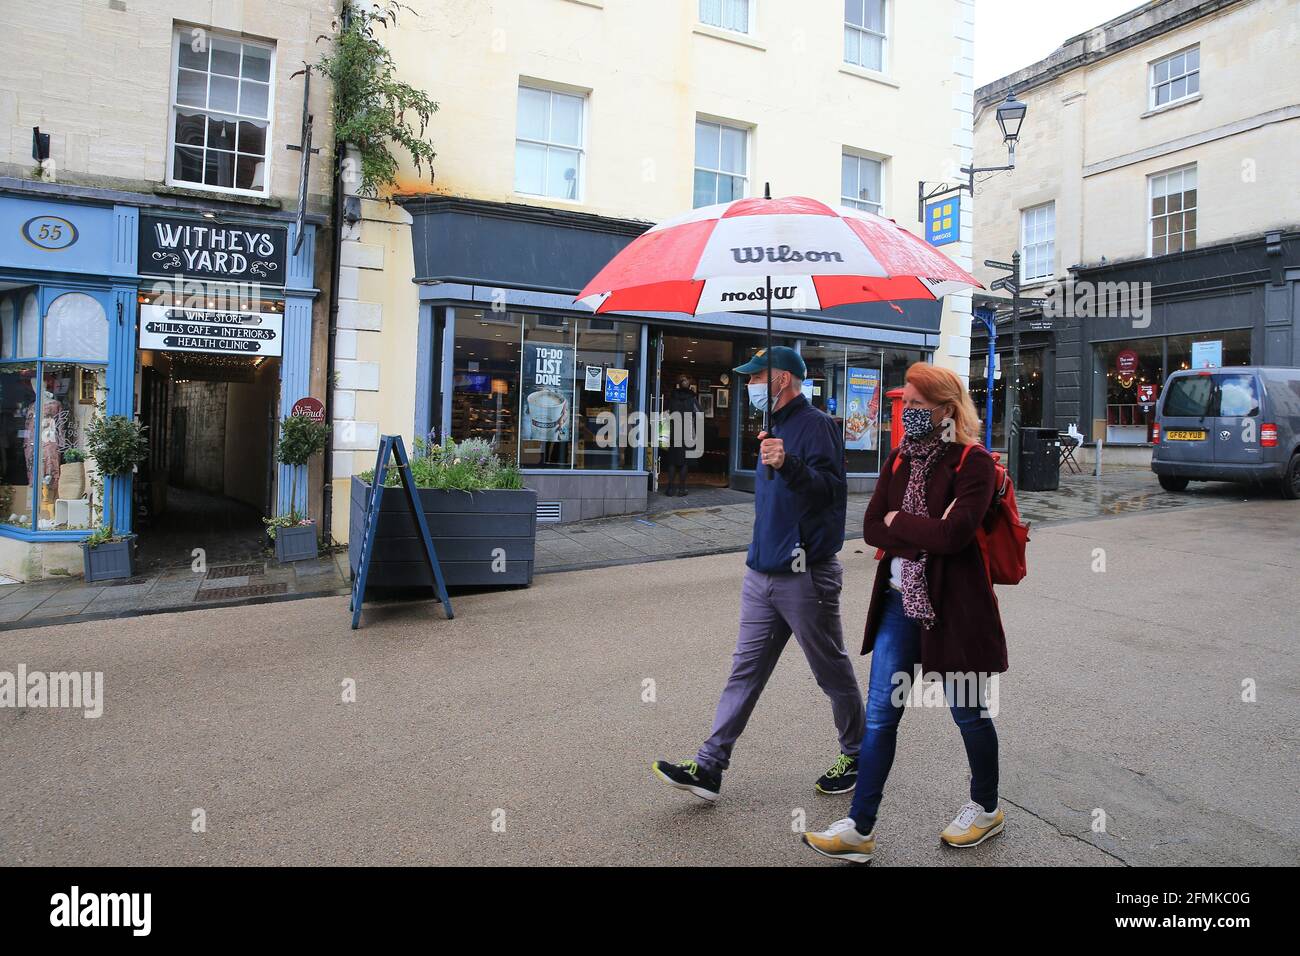 Stroud, UK, 10th May, 2021. UK Weather. The weather switches between heavy down pours to bright sunshine as people shop in Stroud town centre. . Gloucestershire.Credit: Gary Learmonth / Alamy Live News Stock Photo